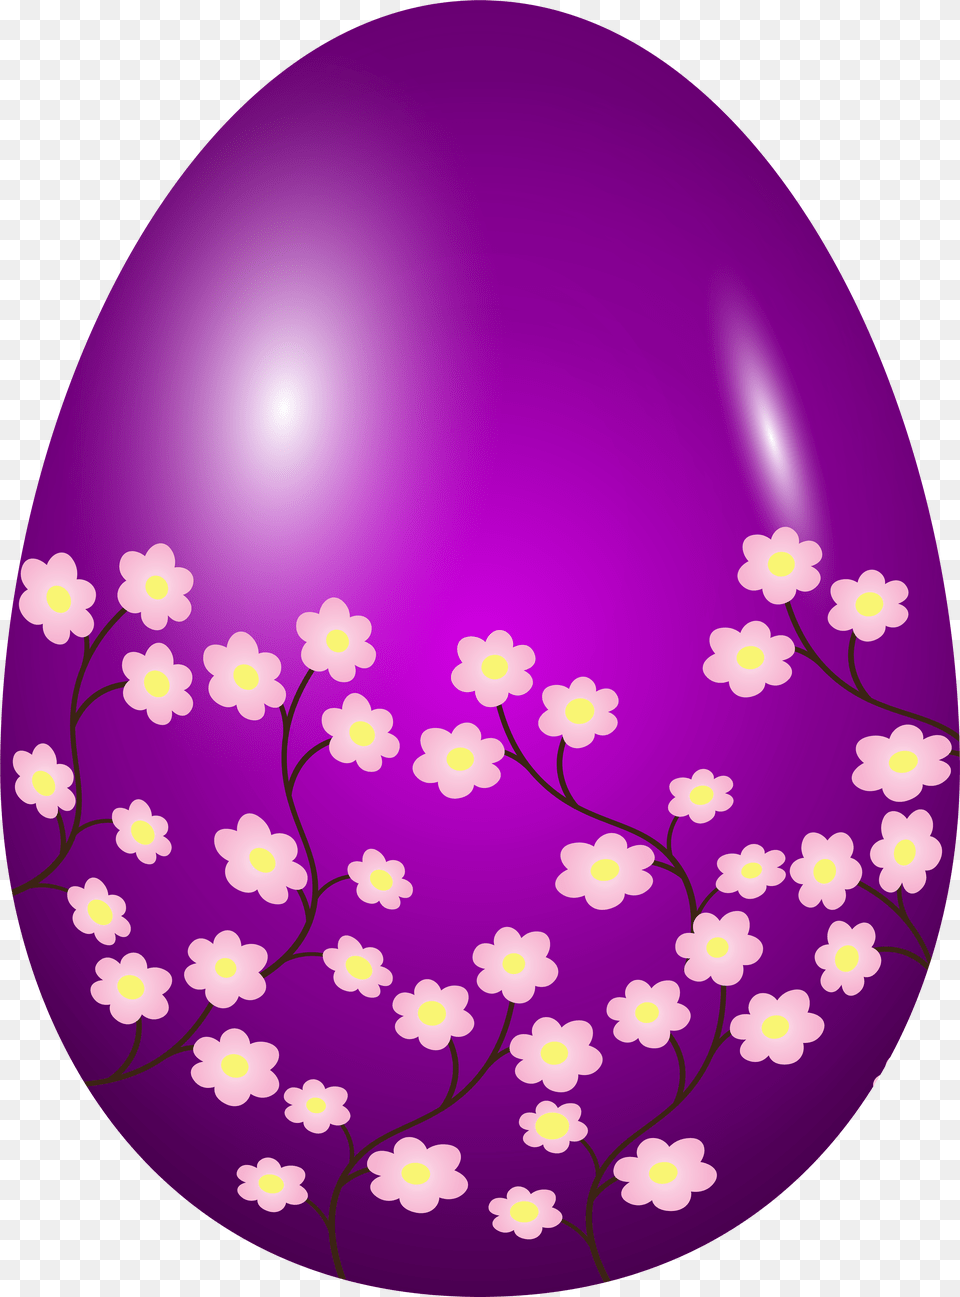 This Image Easter Spring Egg Purple Clip Art Image Portable Network Graphics, Oars, Paddle Free Png